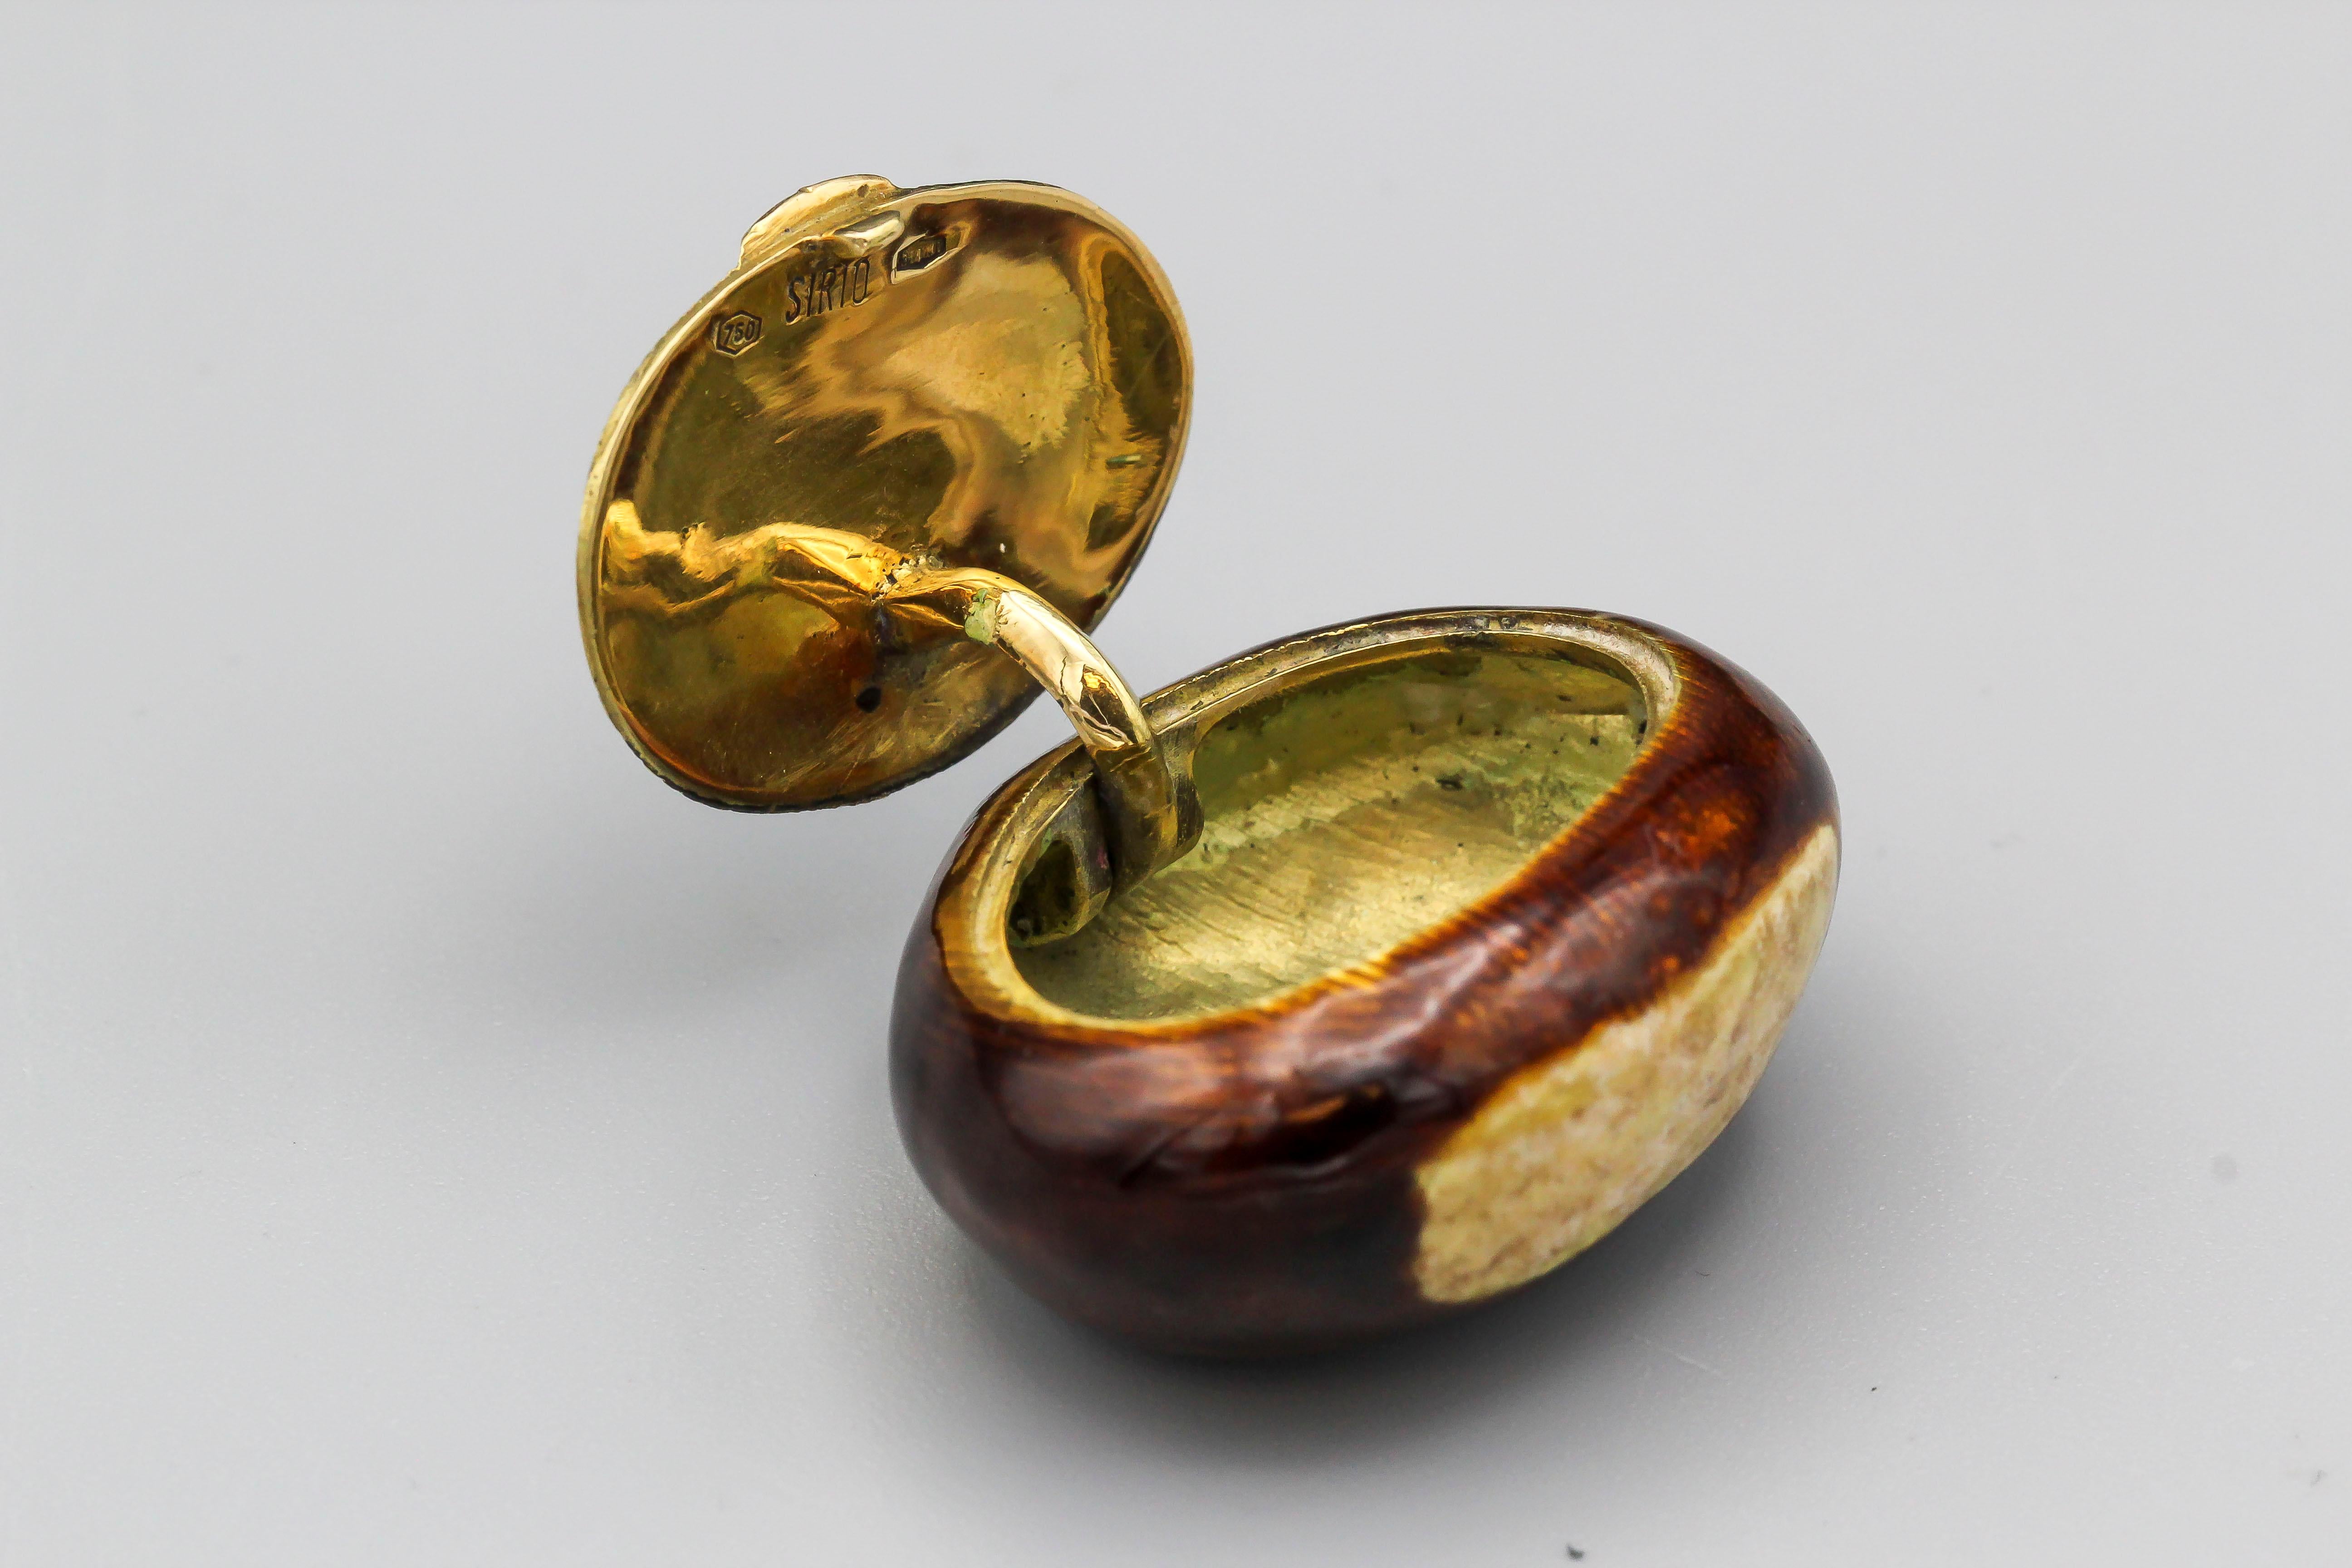 Very fine pill box in likeness of a chestnut, made in Italy circa 1940-50s.  Made in 18K yellow gold and with different shades of enamel, very lifelike. Beautiful piece with stunning workmanship and attention to detail, sure to start a